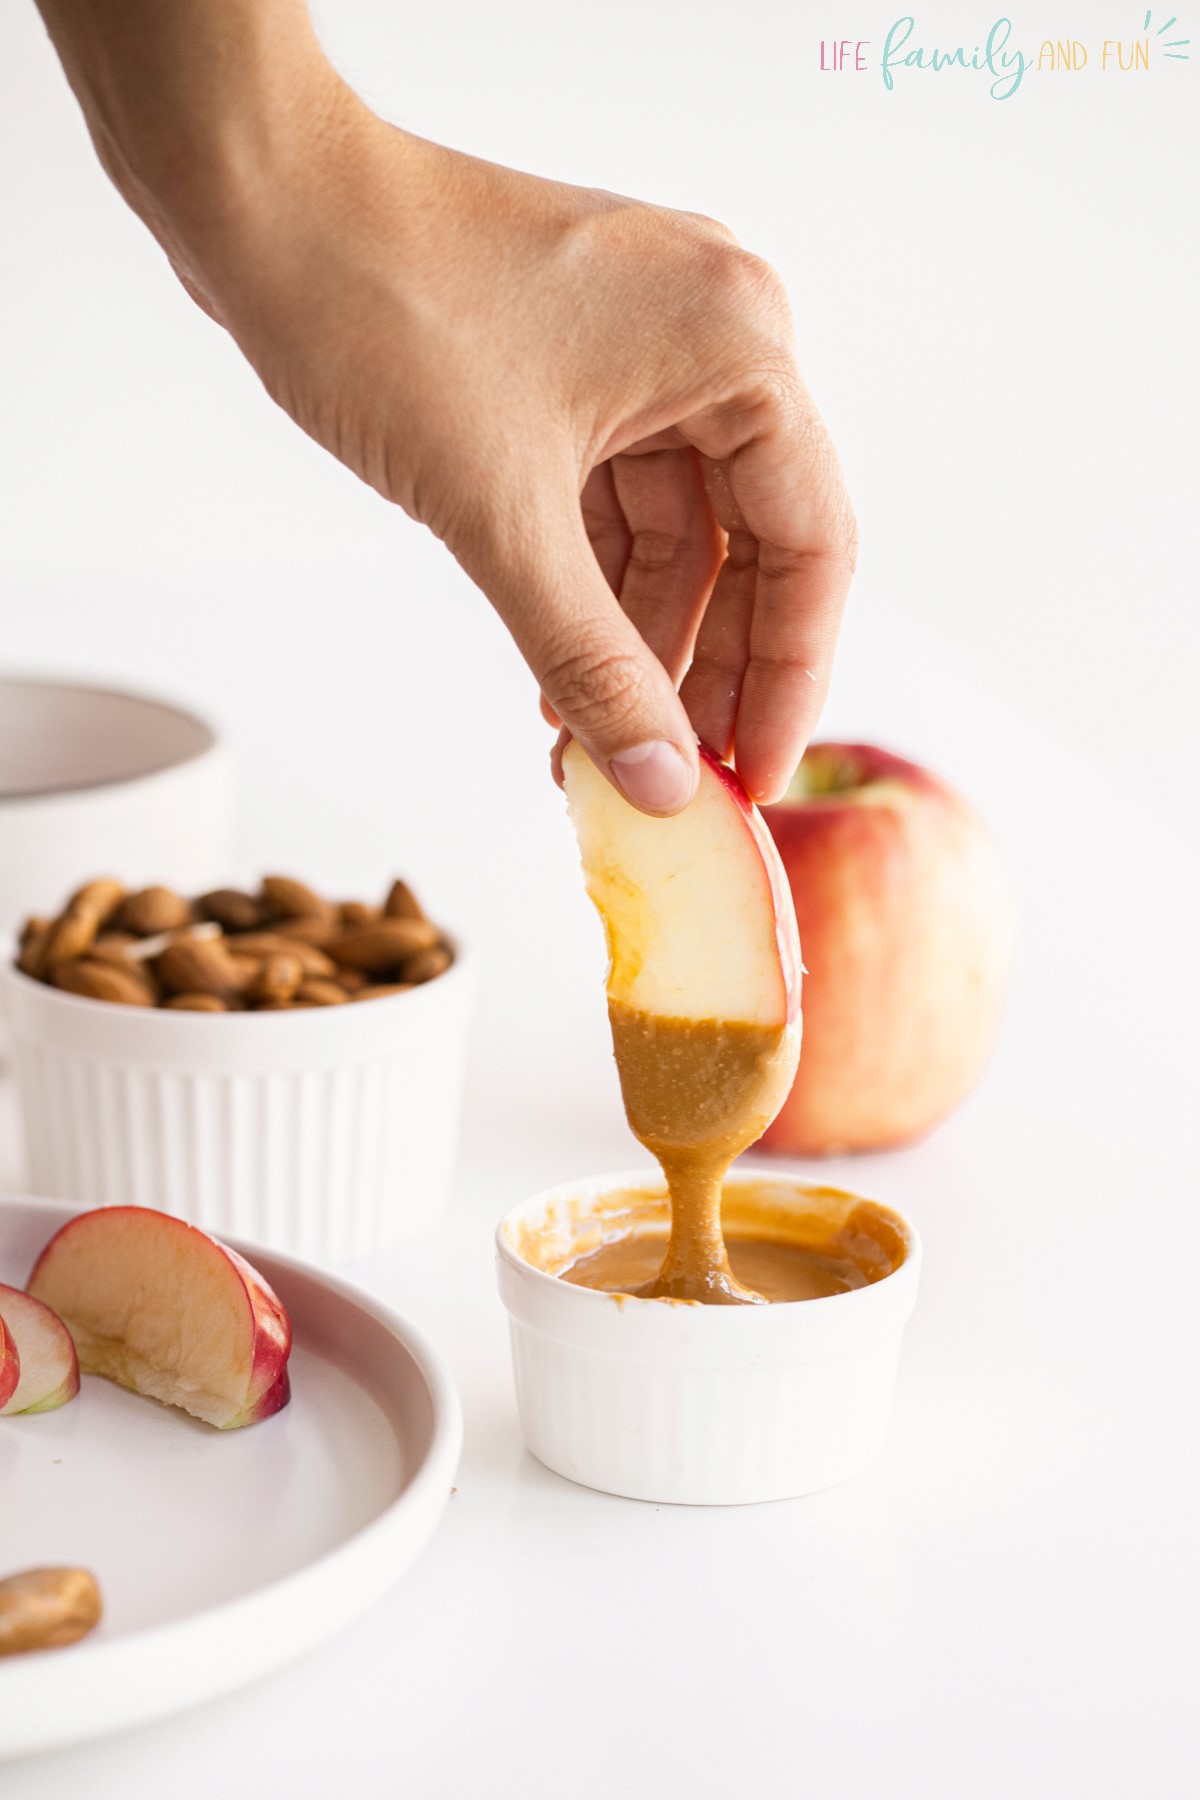 Apple Slices with Peanut Butter - recipe